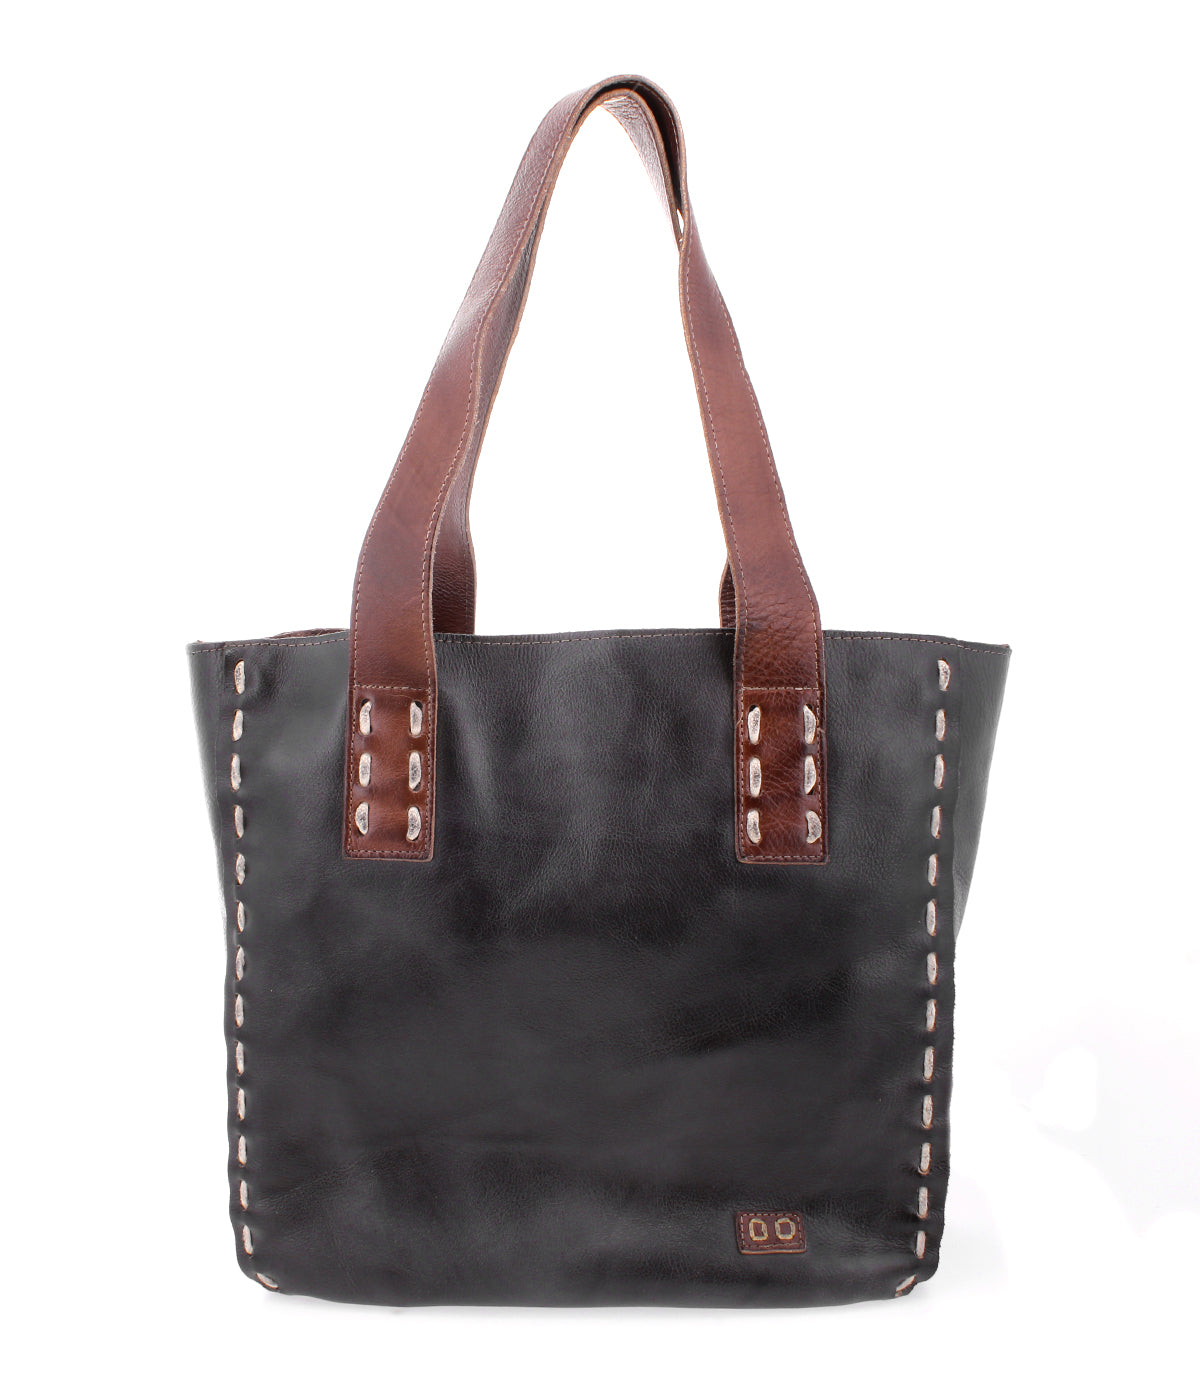 A vintage-chic black leather Stevie tote bag with brown handles by Bed Stu.